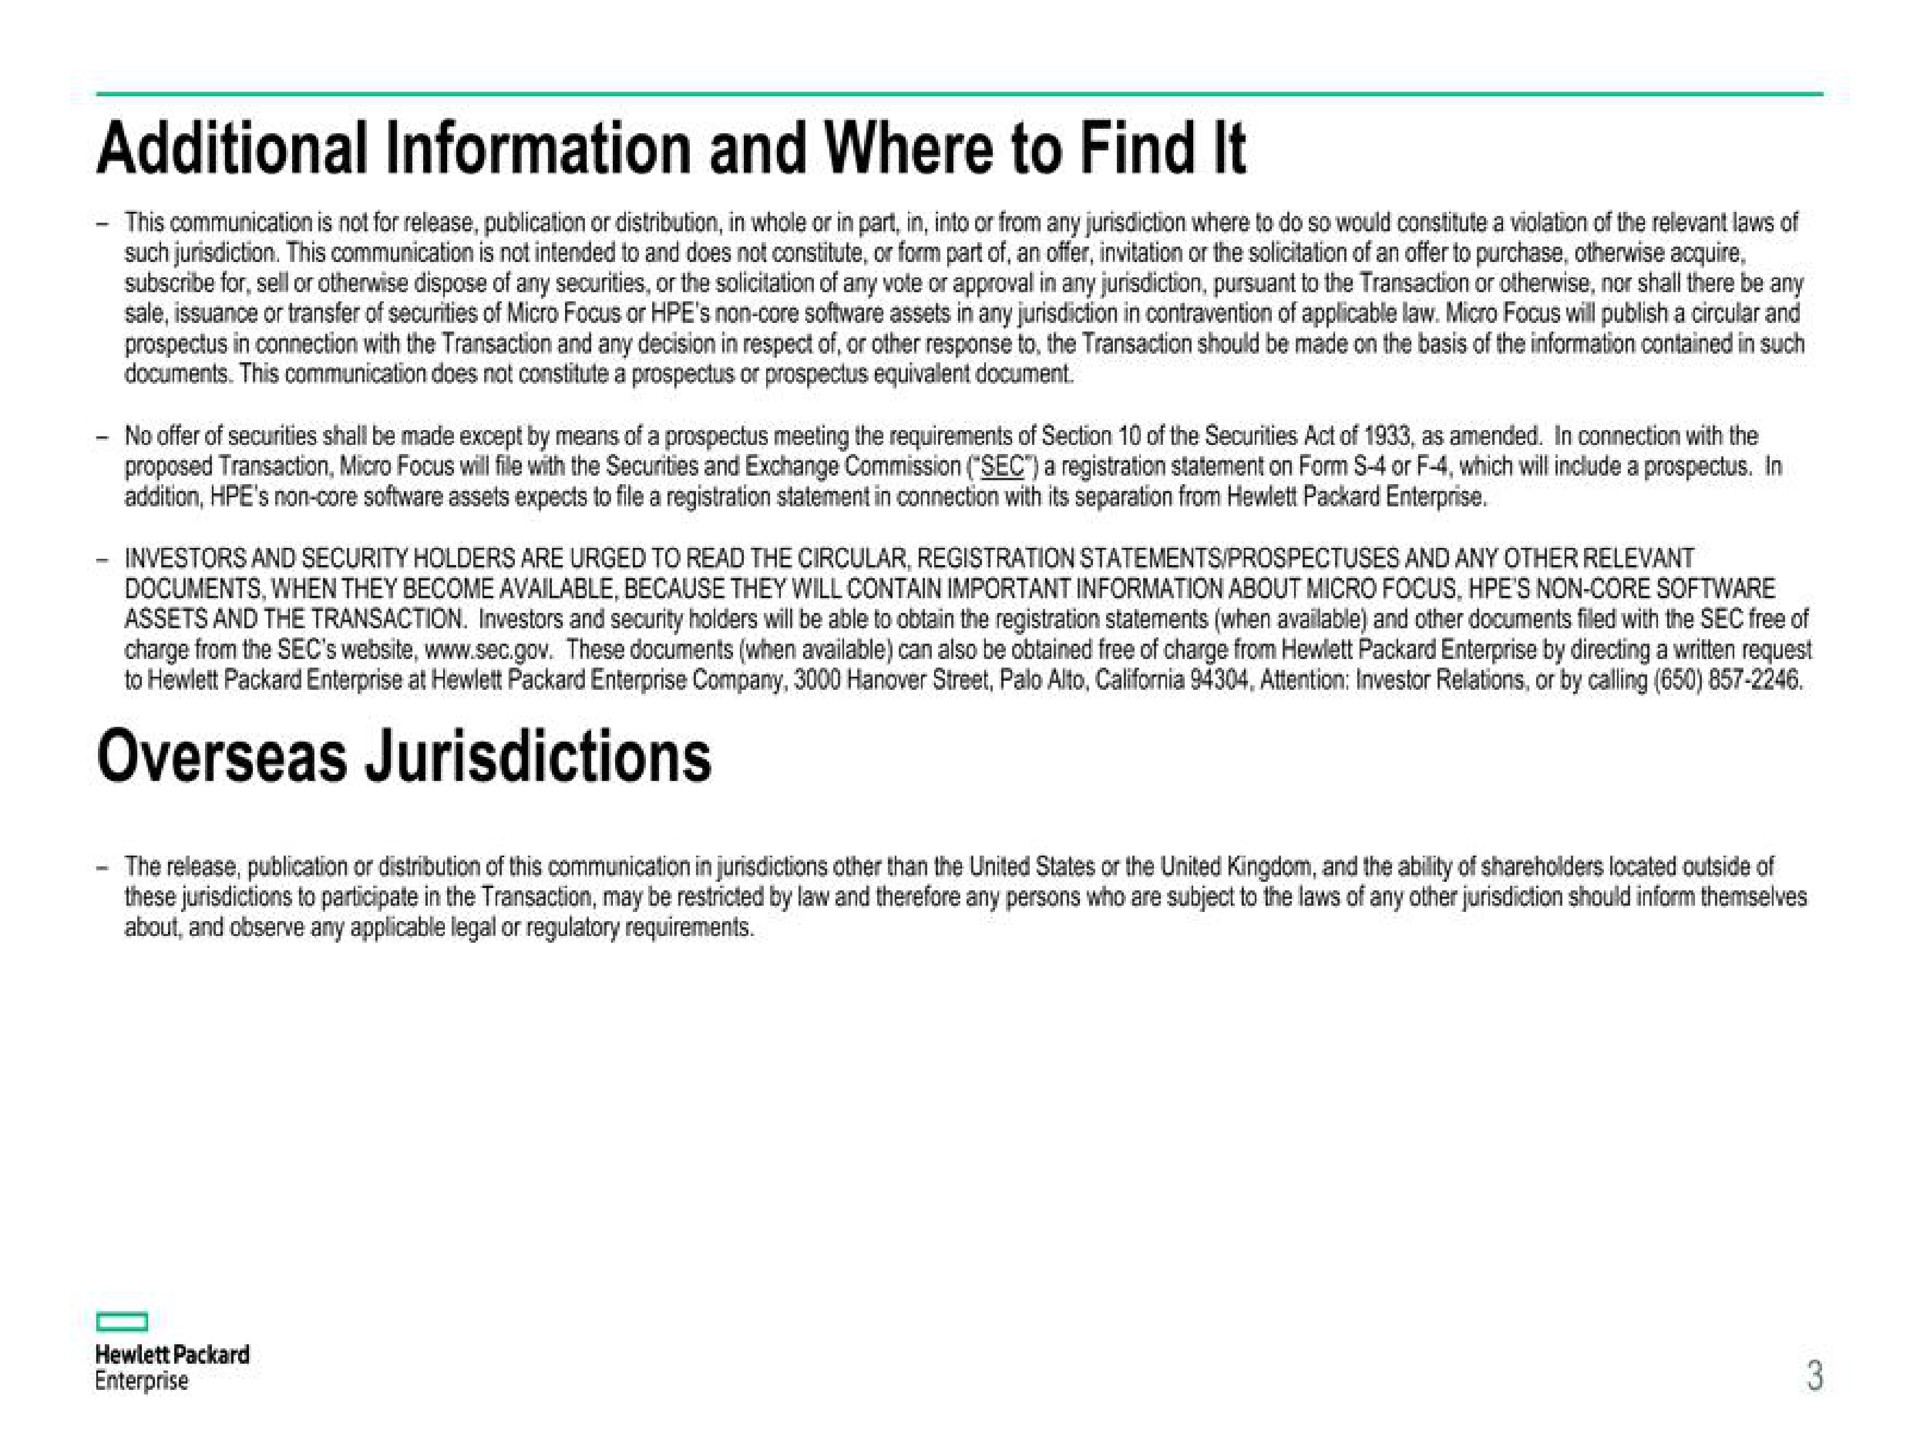 additional information and where to find it overseas jurisdictions | Hewlett Packard Enterprise